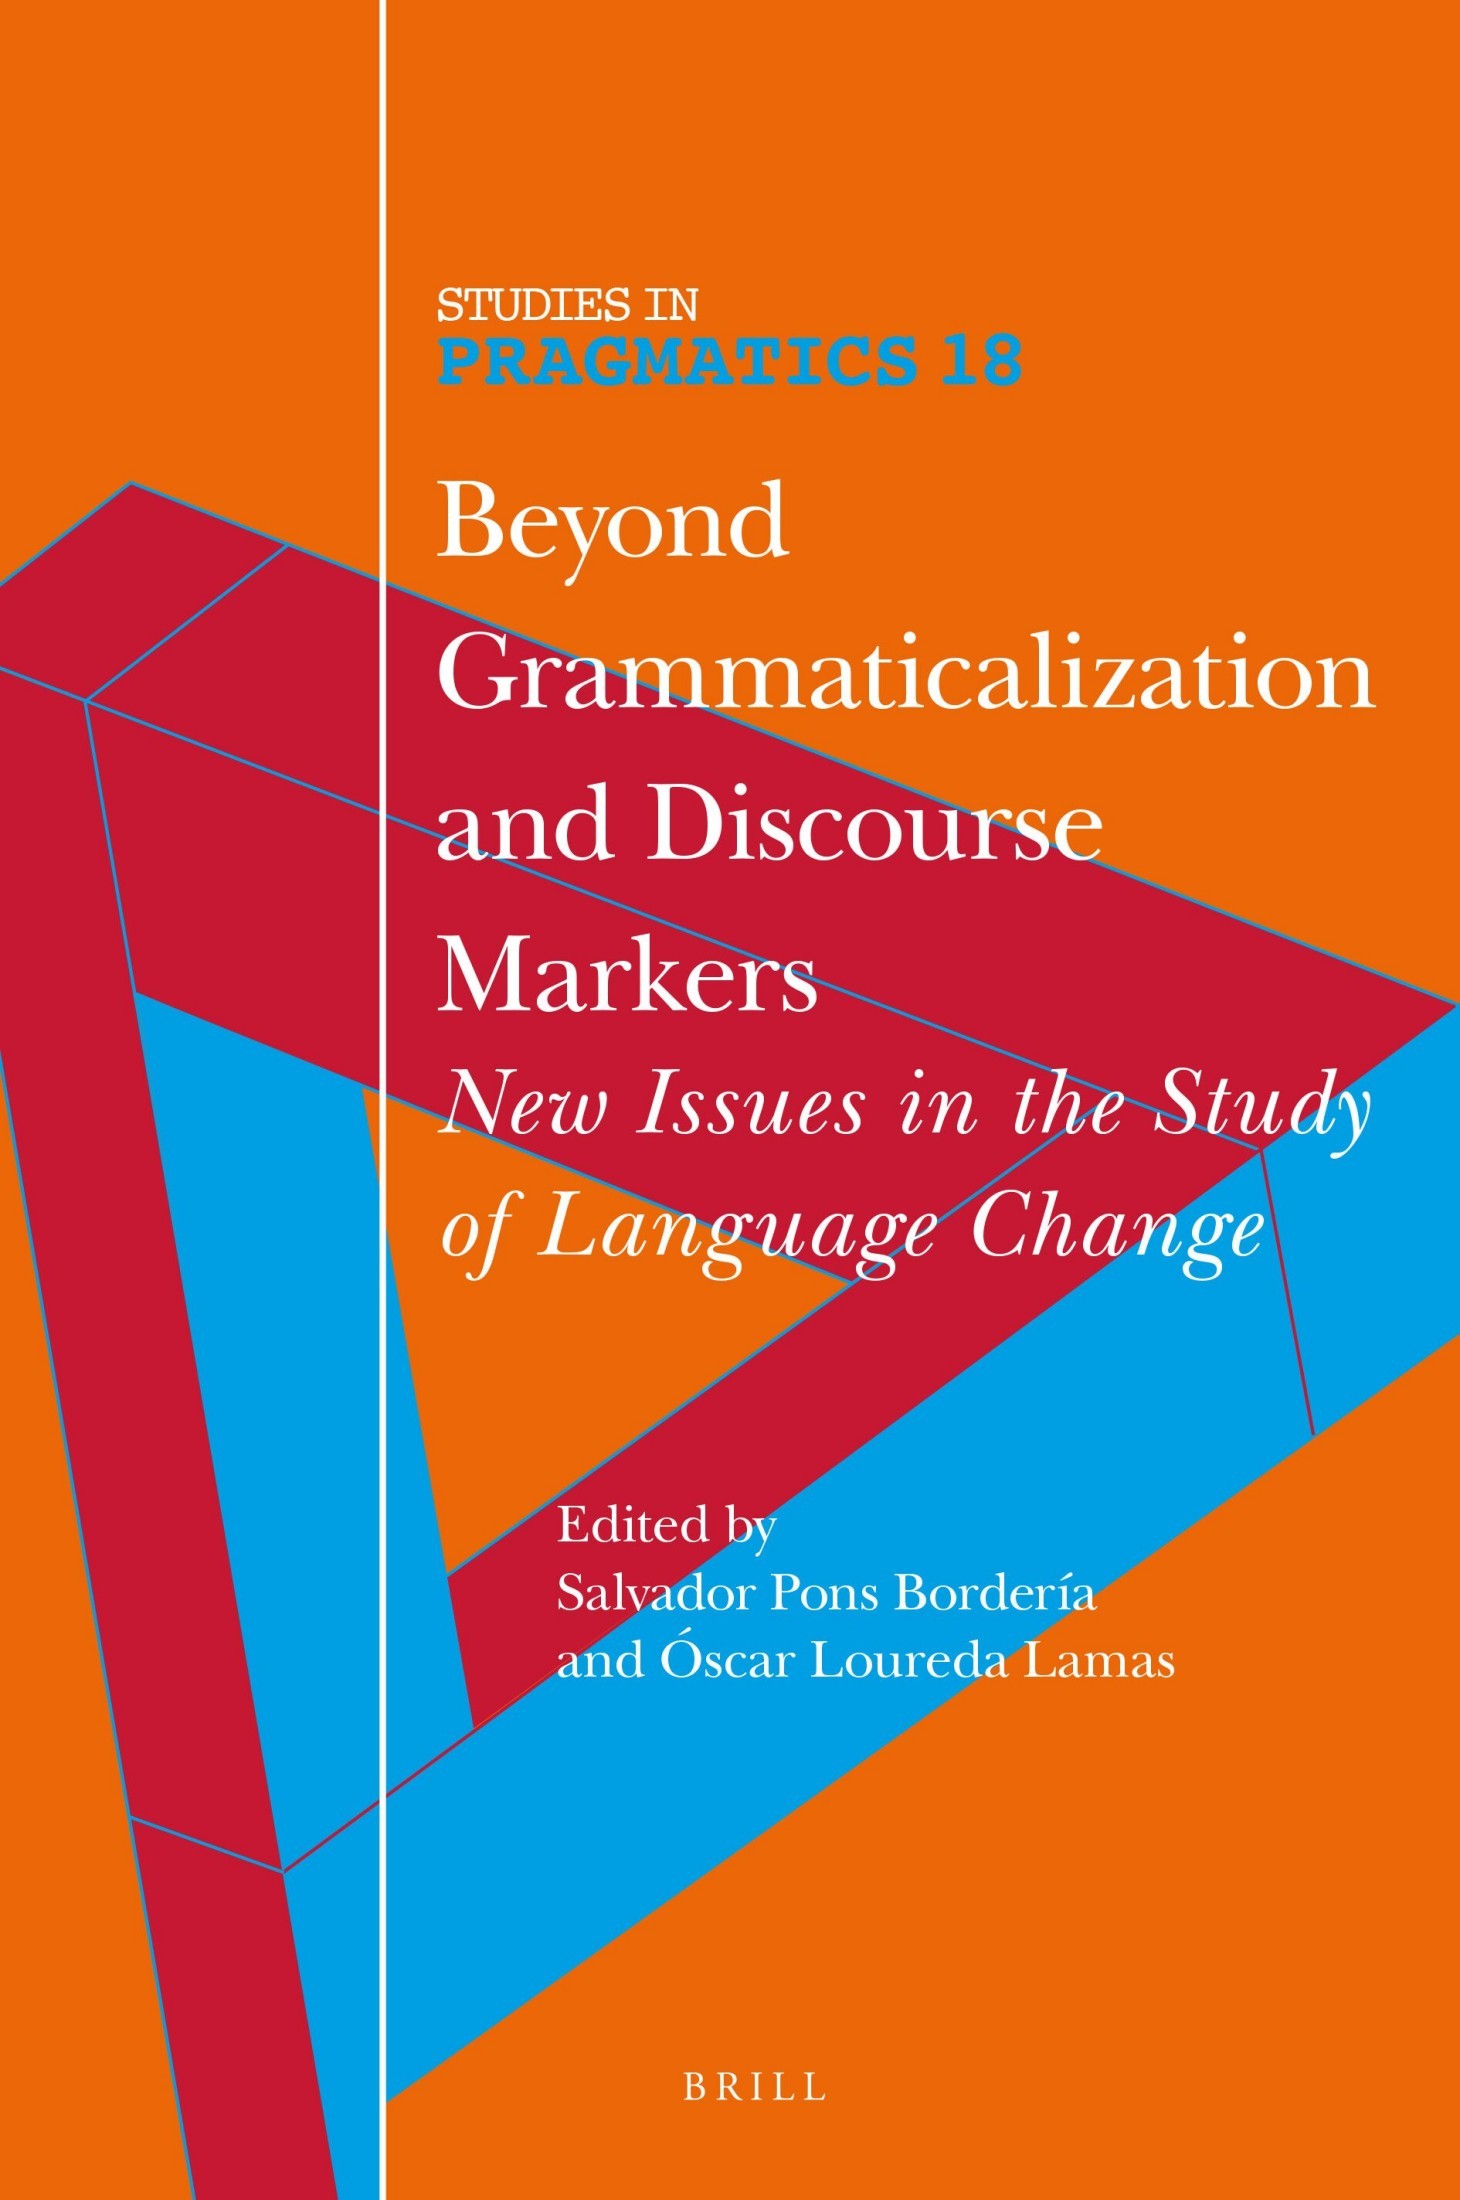 Beyond Grammaticalization and Discourse Markers: New Issues in the Study of Language Change